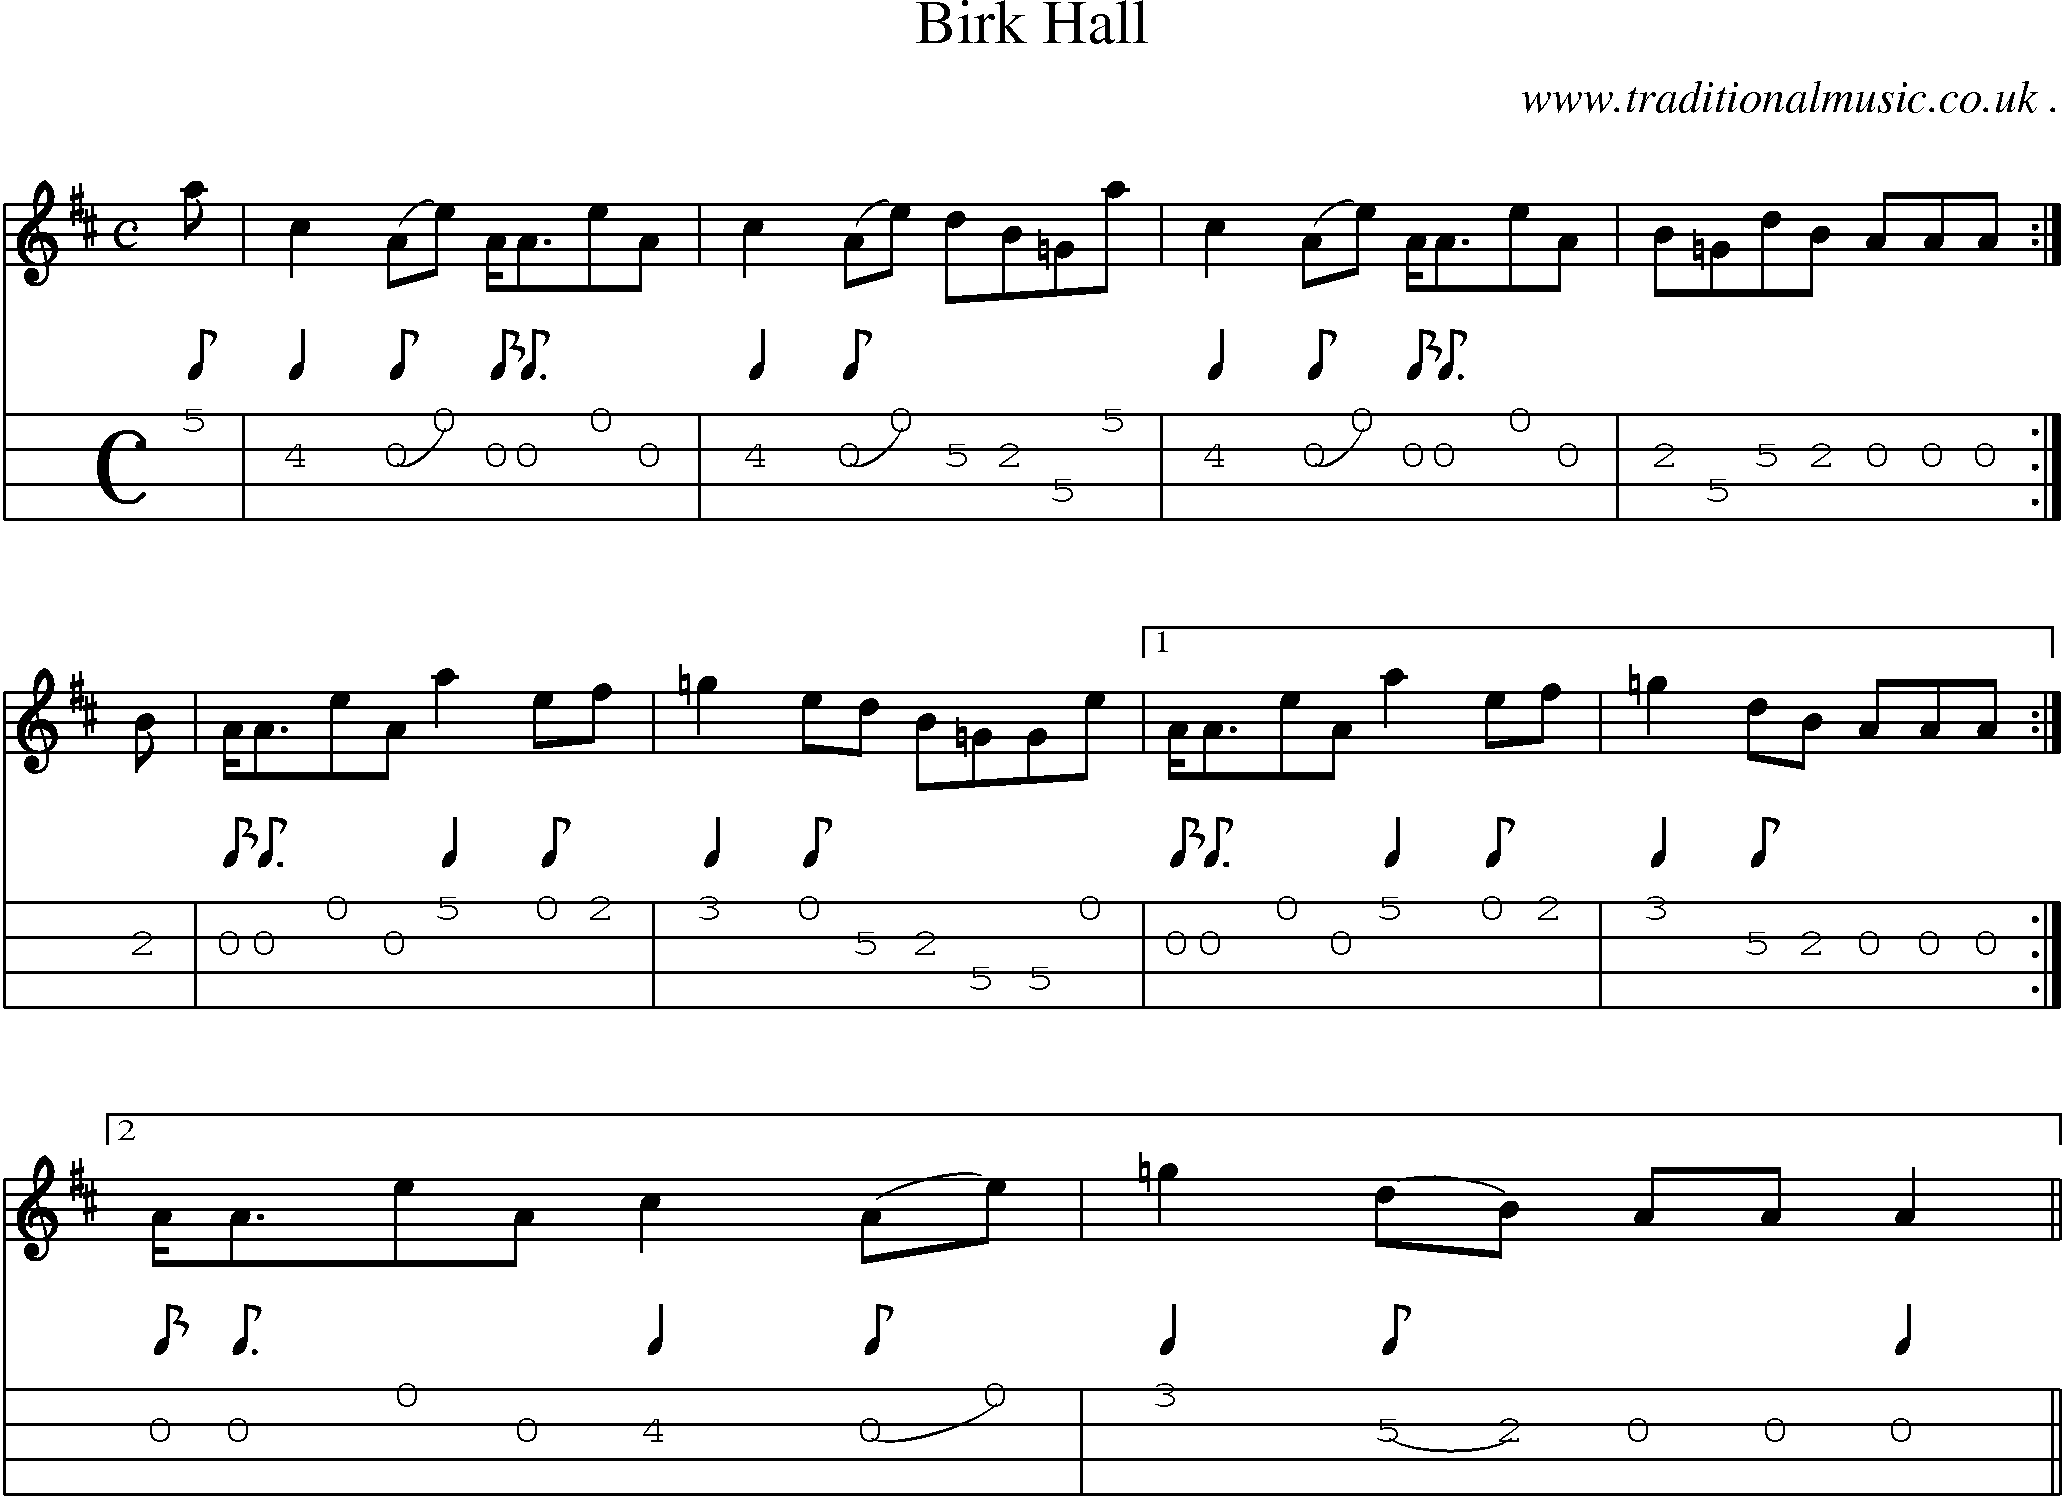 Sheet-music  score, Chords and Mandolin Tabs for Birk Hall